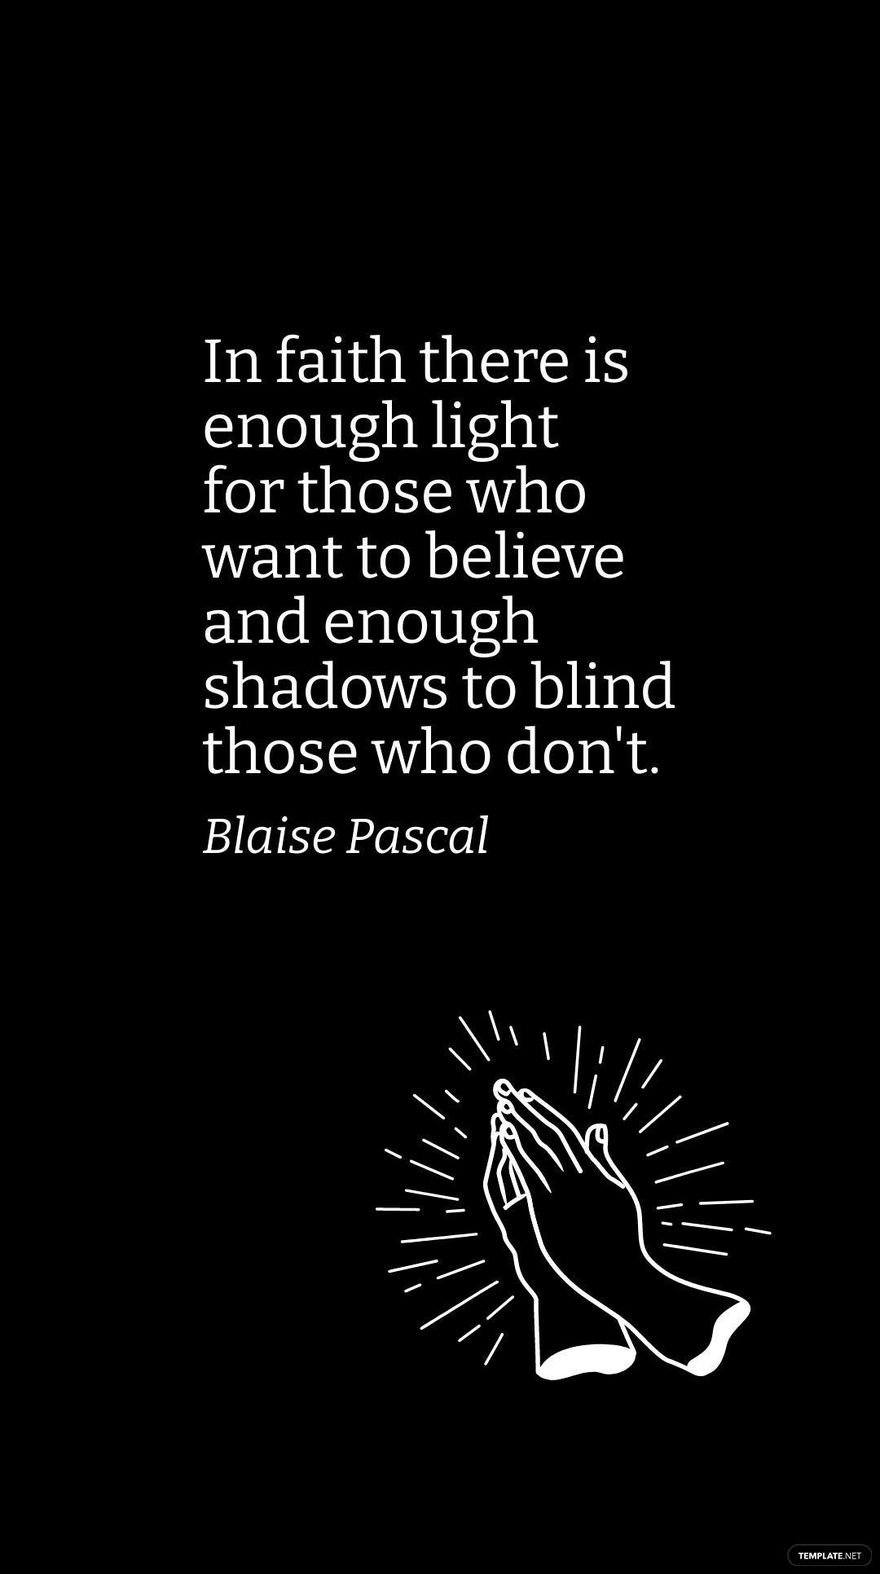 Blaise Pascal - In faith there is enough light for those who want to believe and enough shadows to blind those who don't.